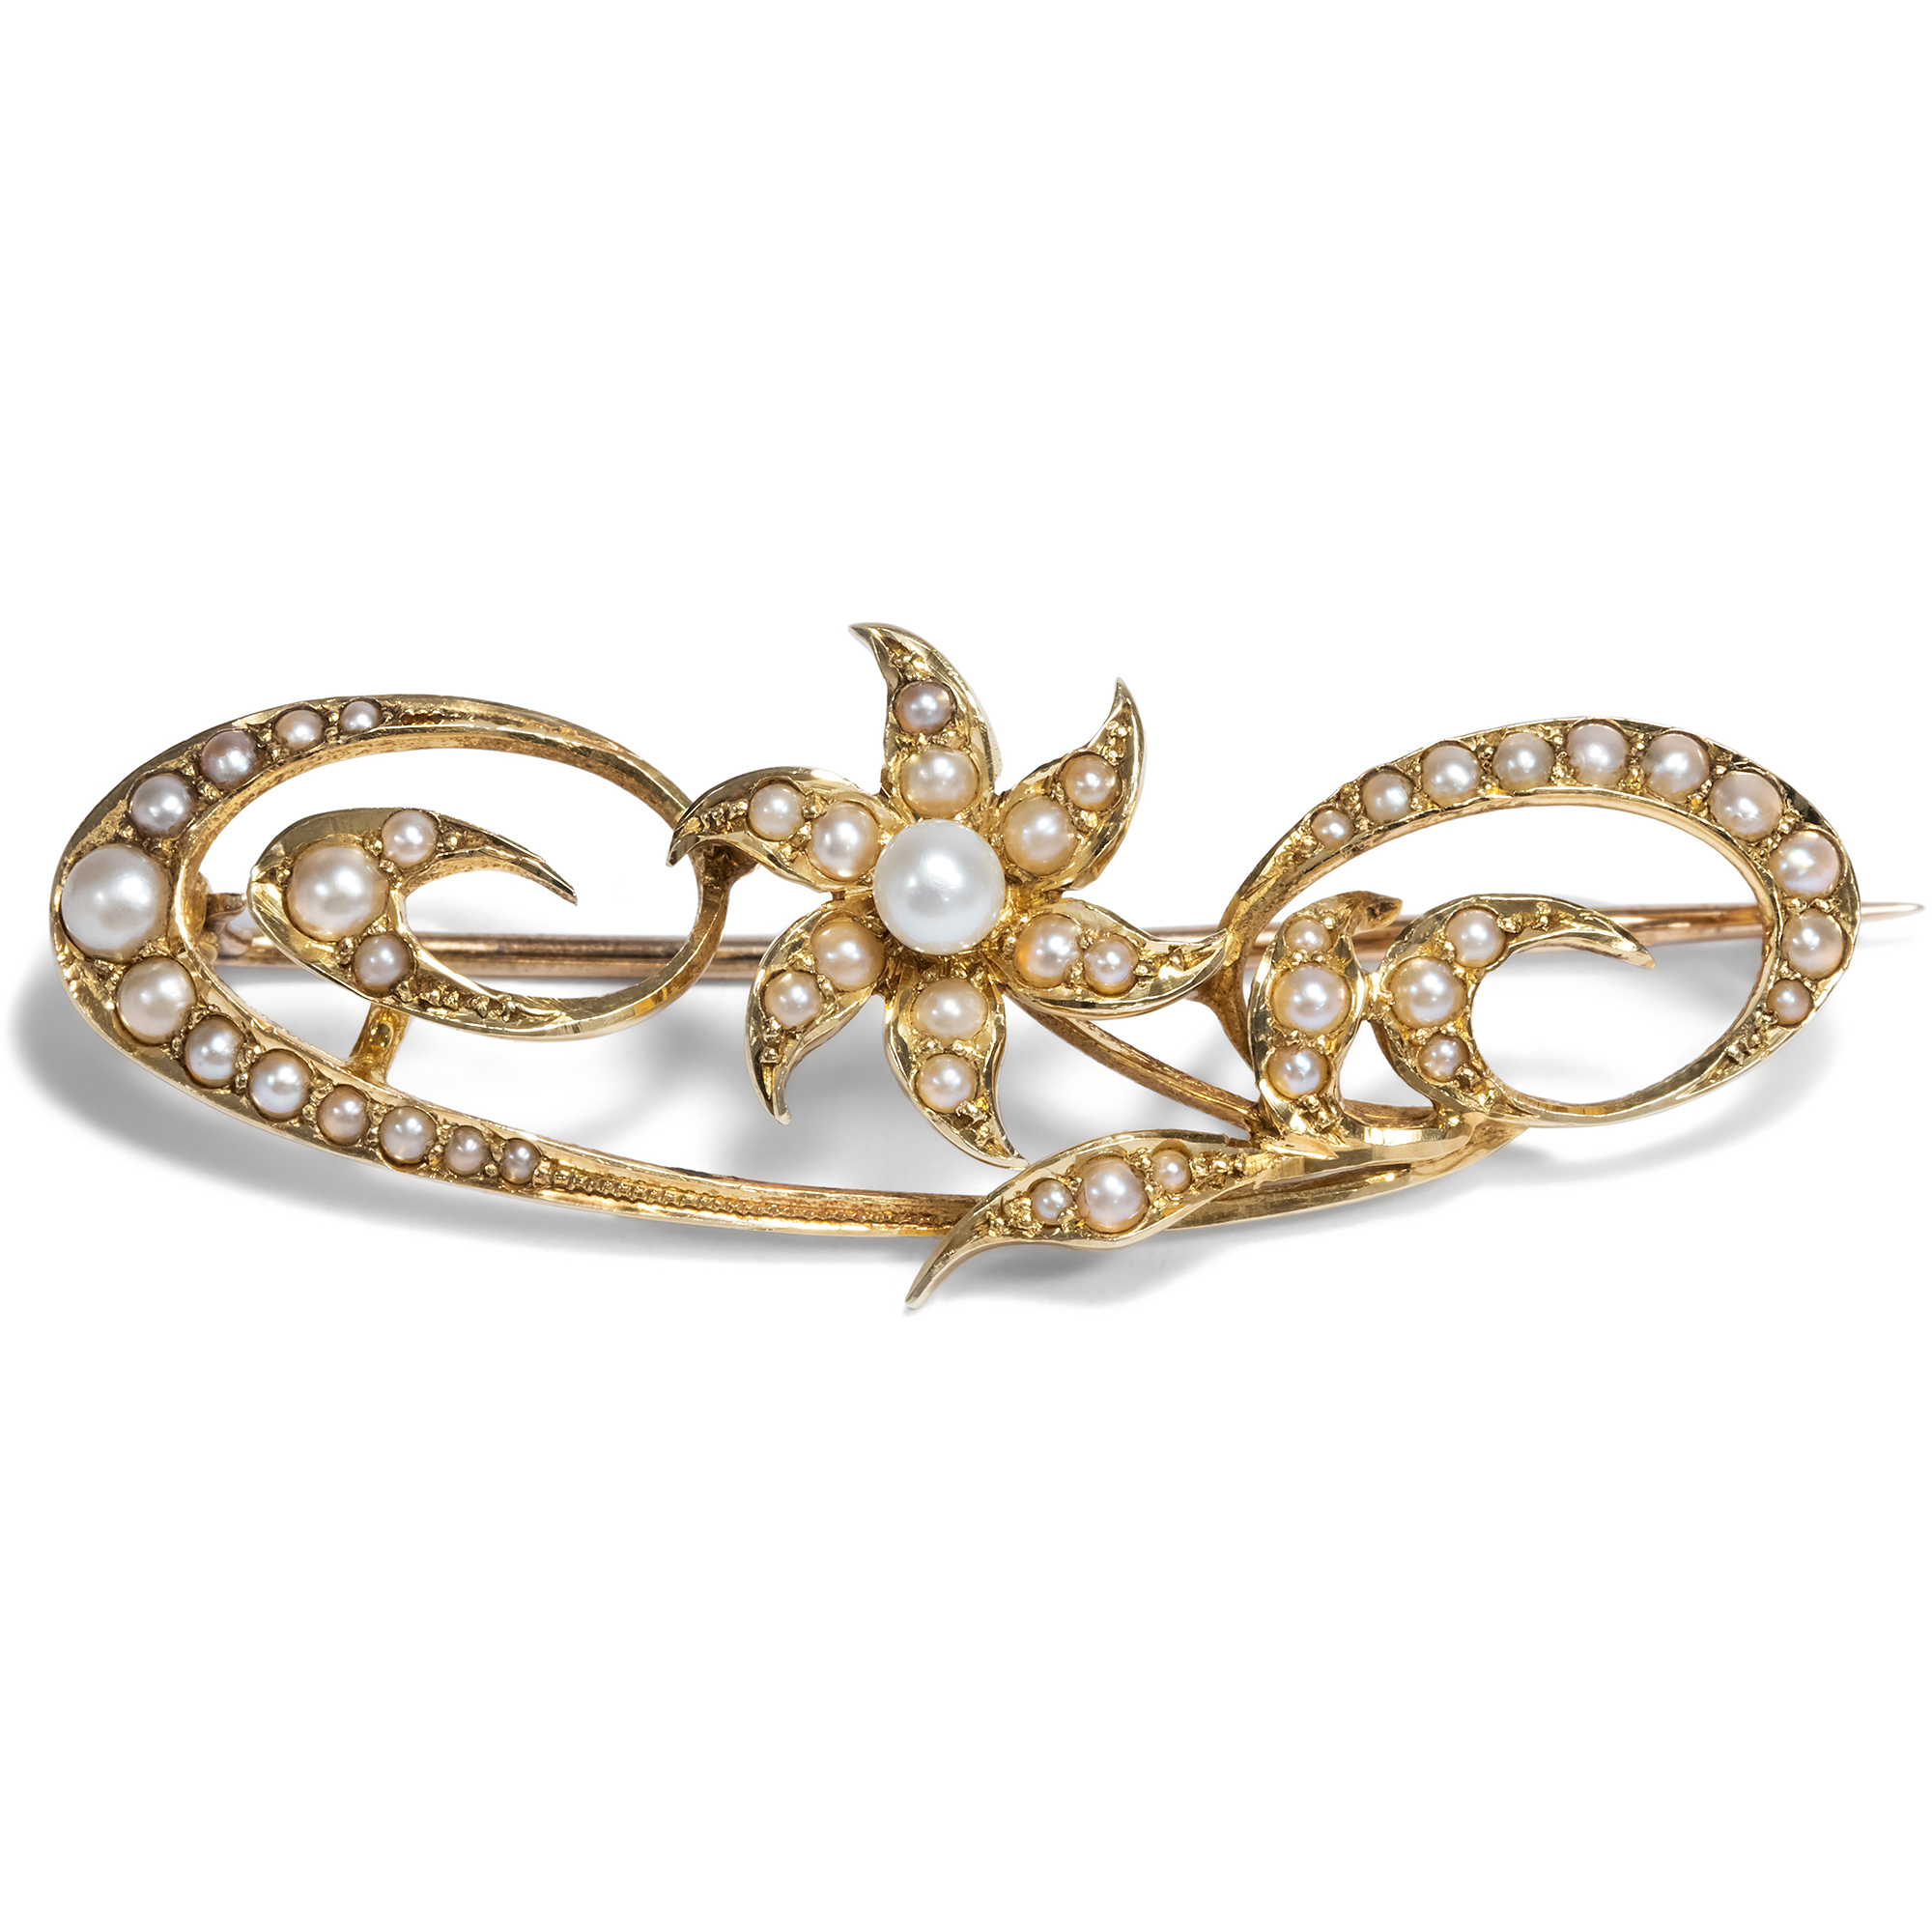 Enchanting Brooch With Natural Pearls in Gold, Great Britain Around 1900